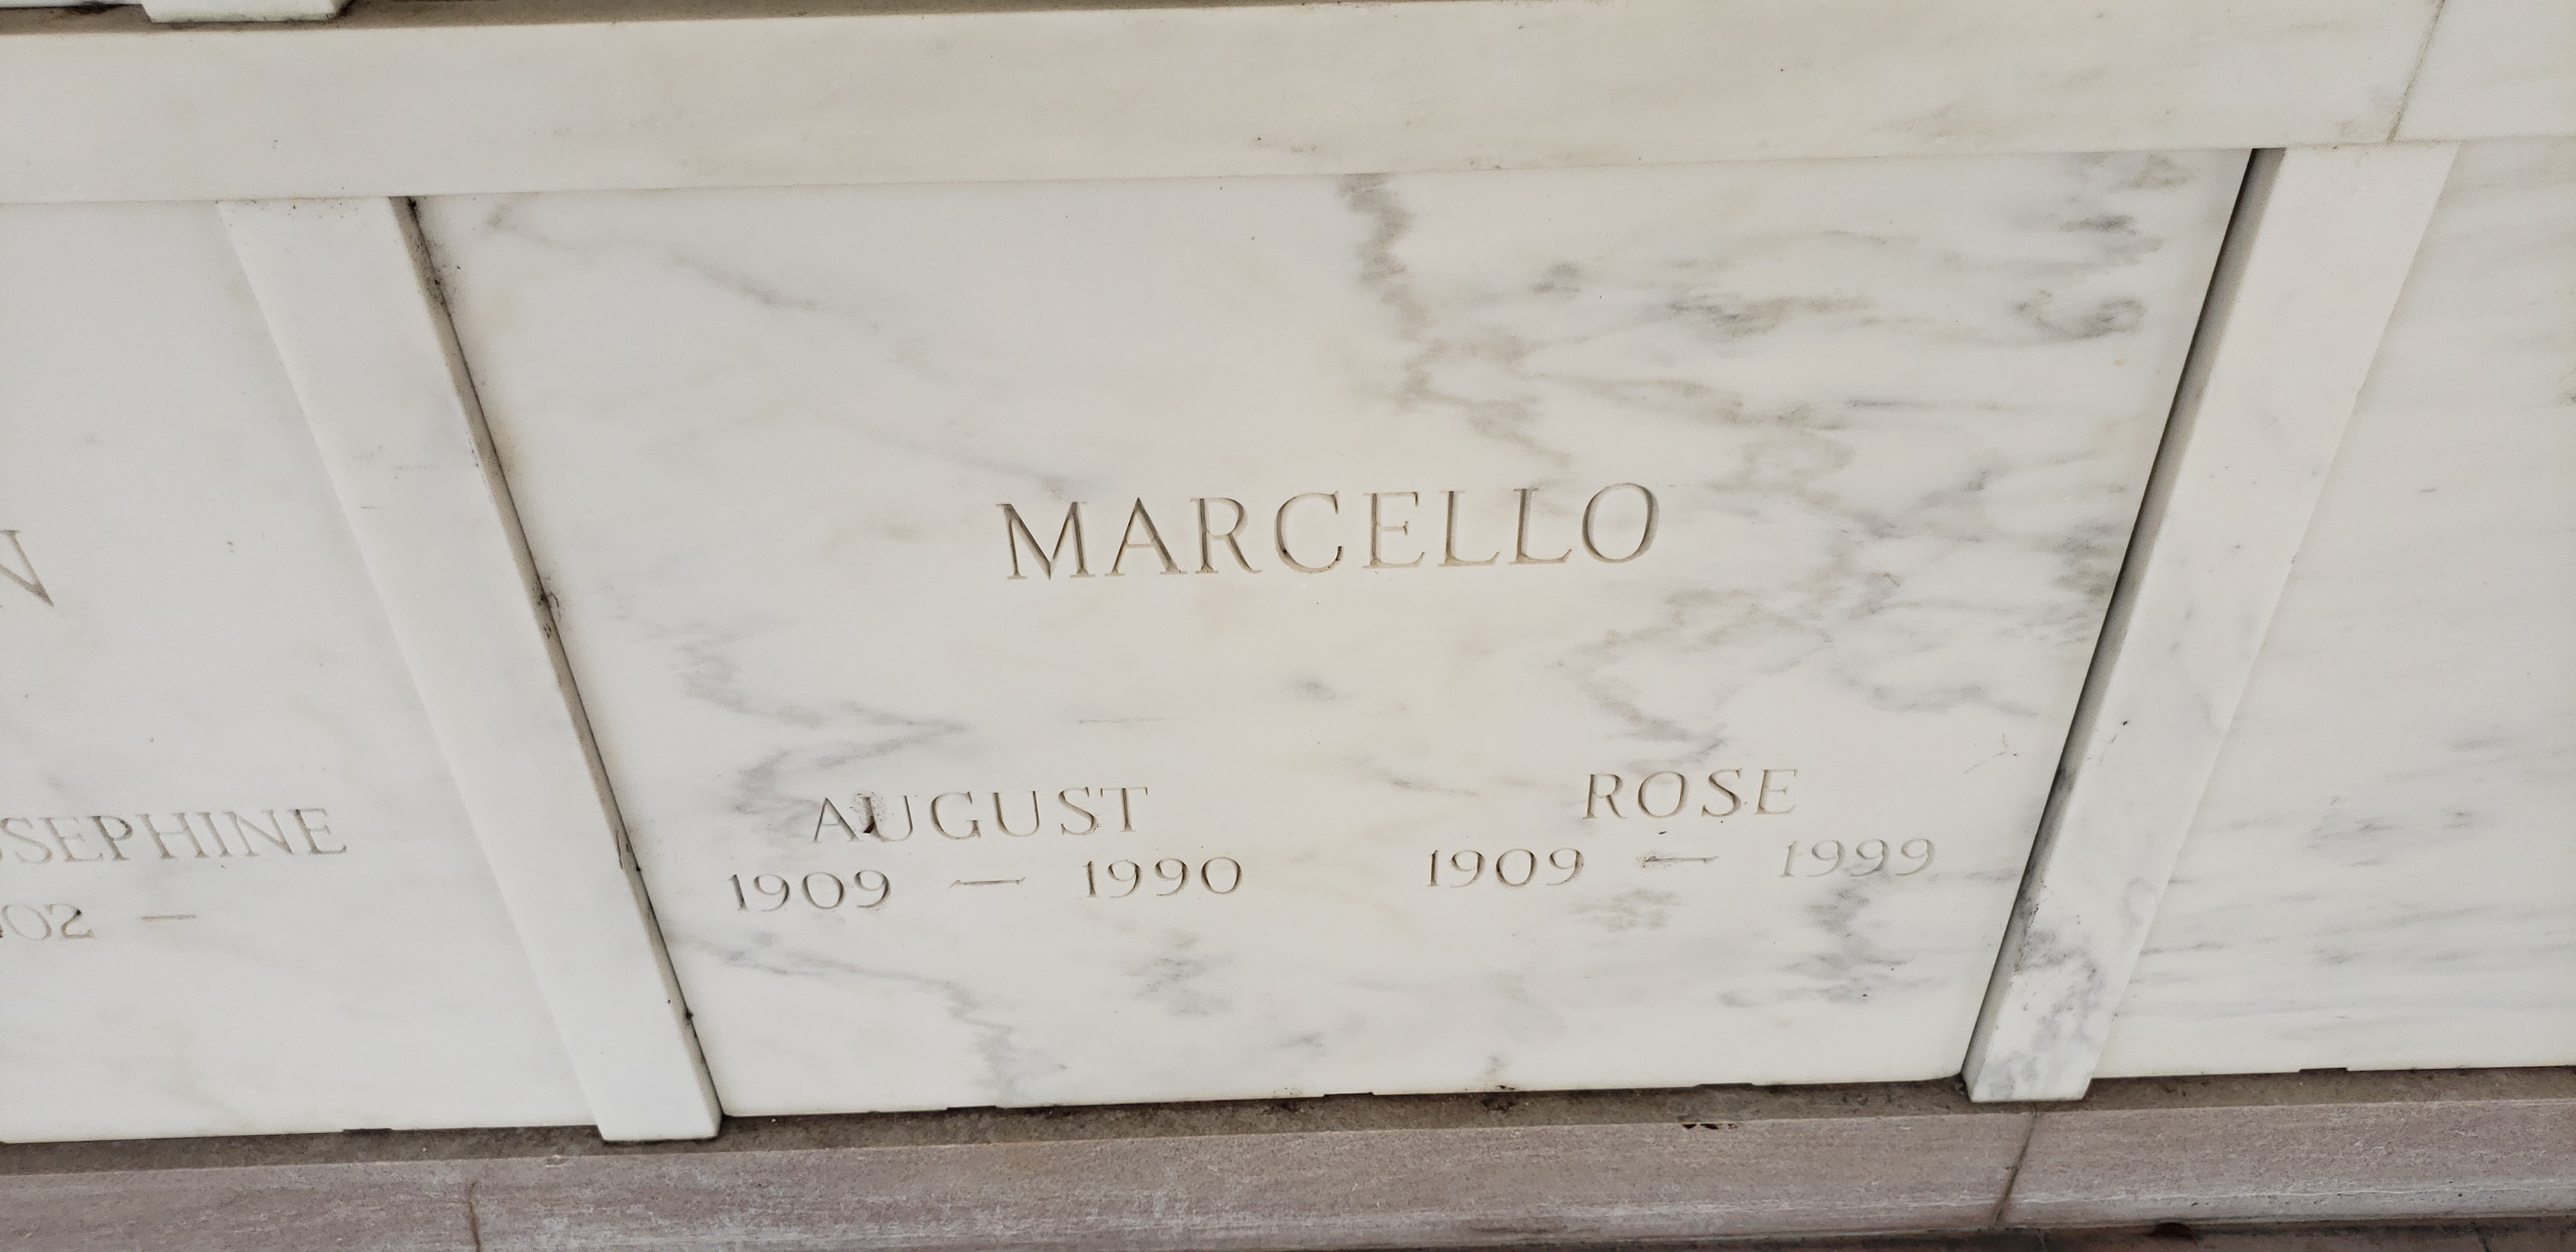 August Marcello